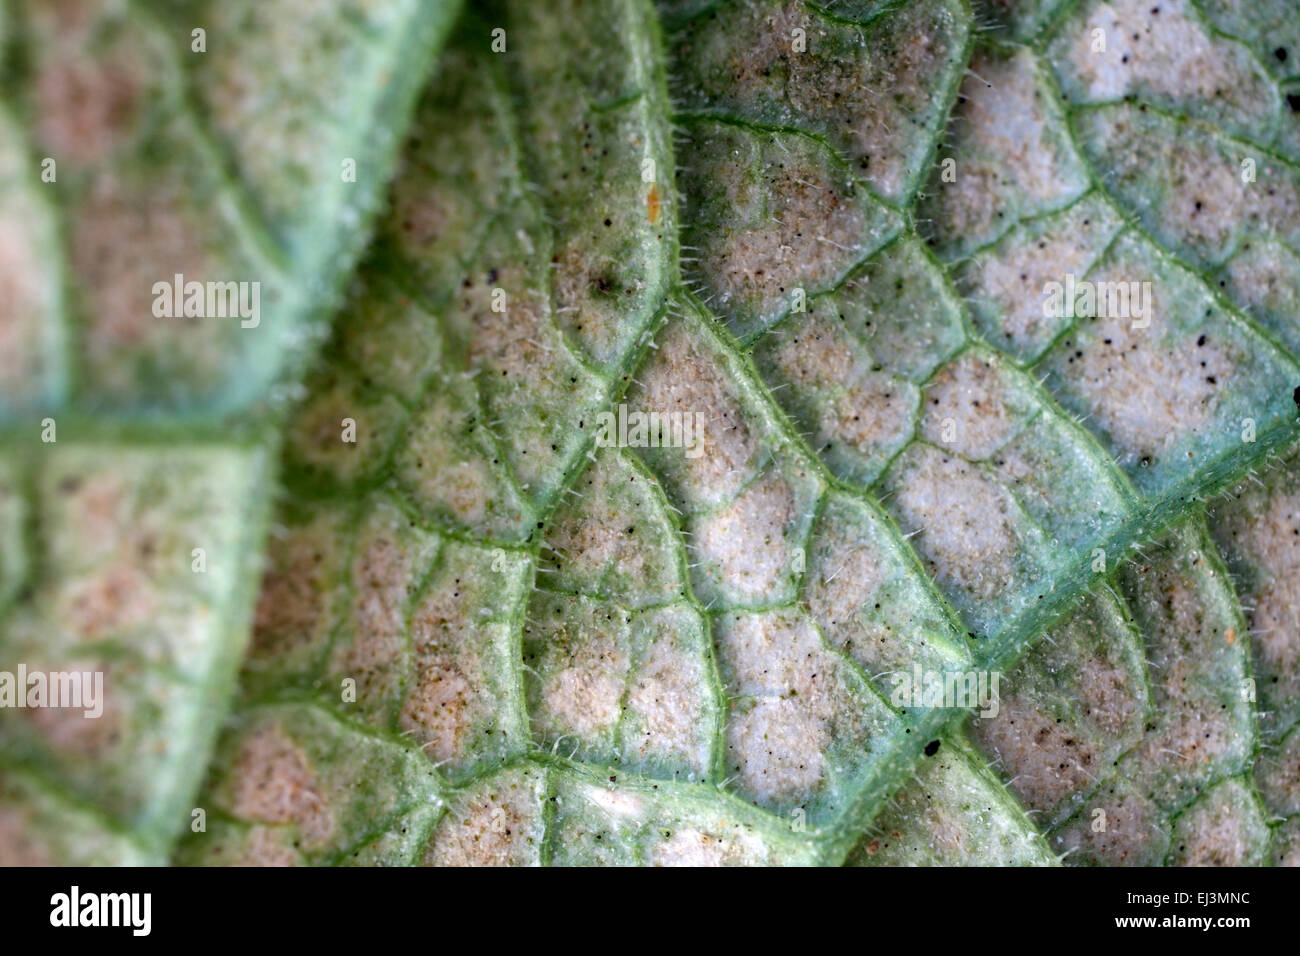 Red spider mite infestation Tetranychus urticae - symptoms from the under side of a Cucumber leaf - Cucumis sativus Stock Photo